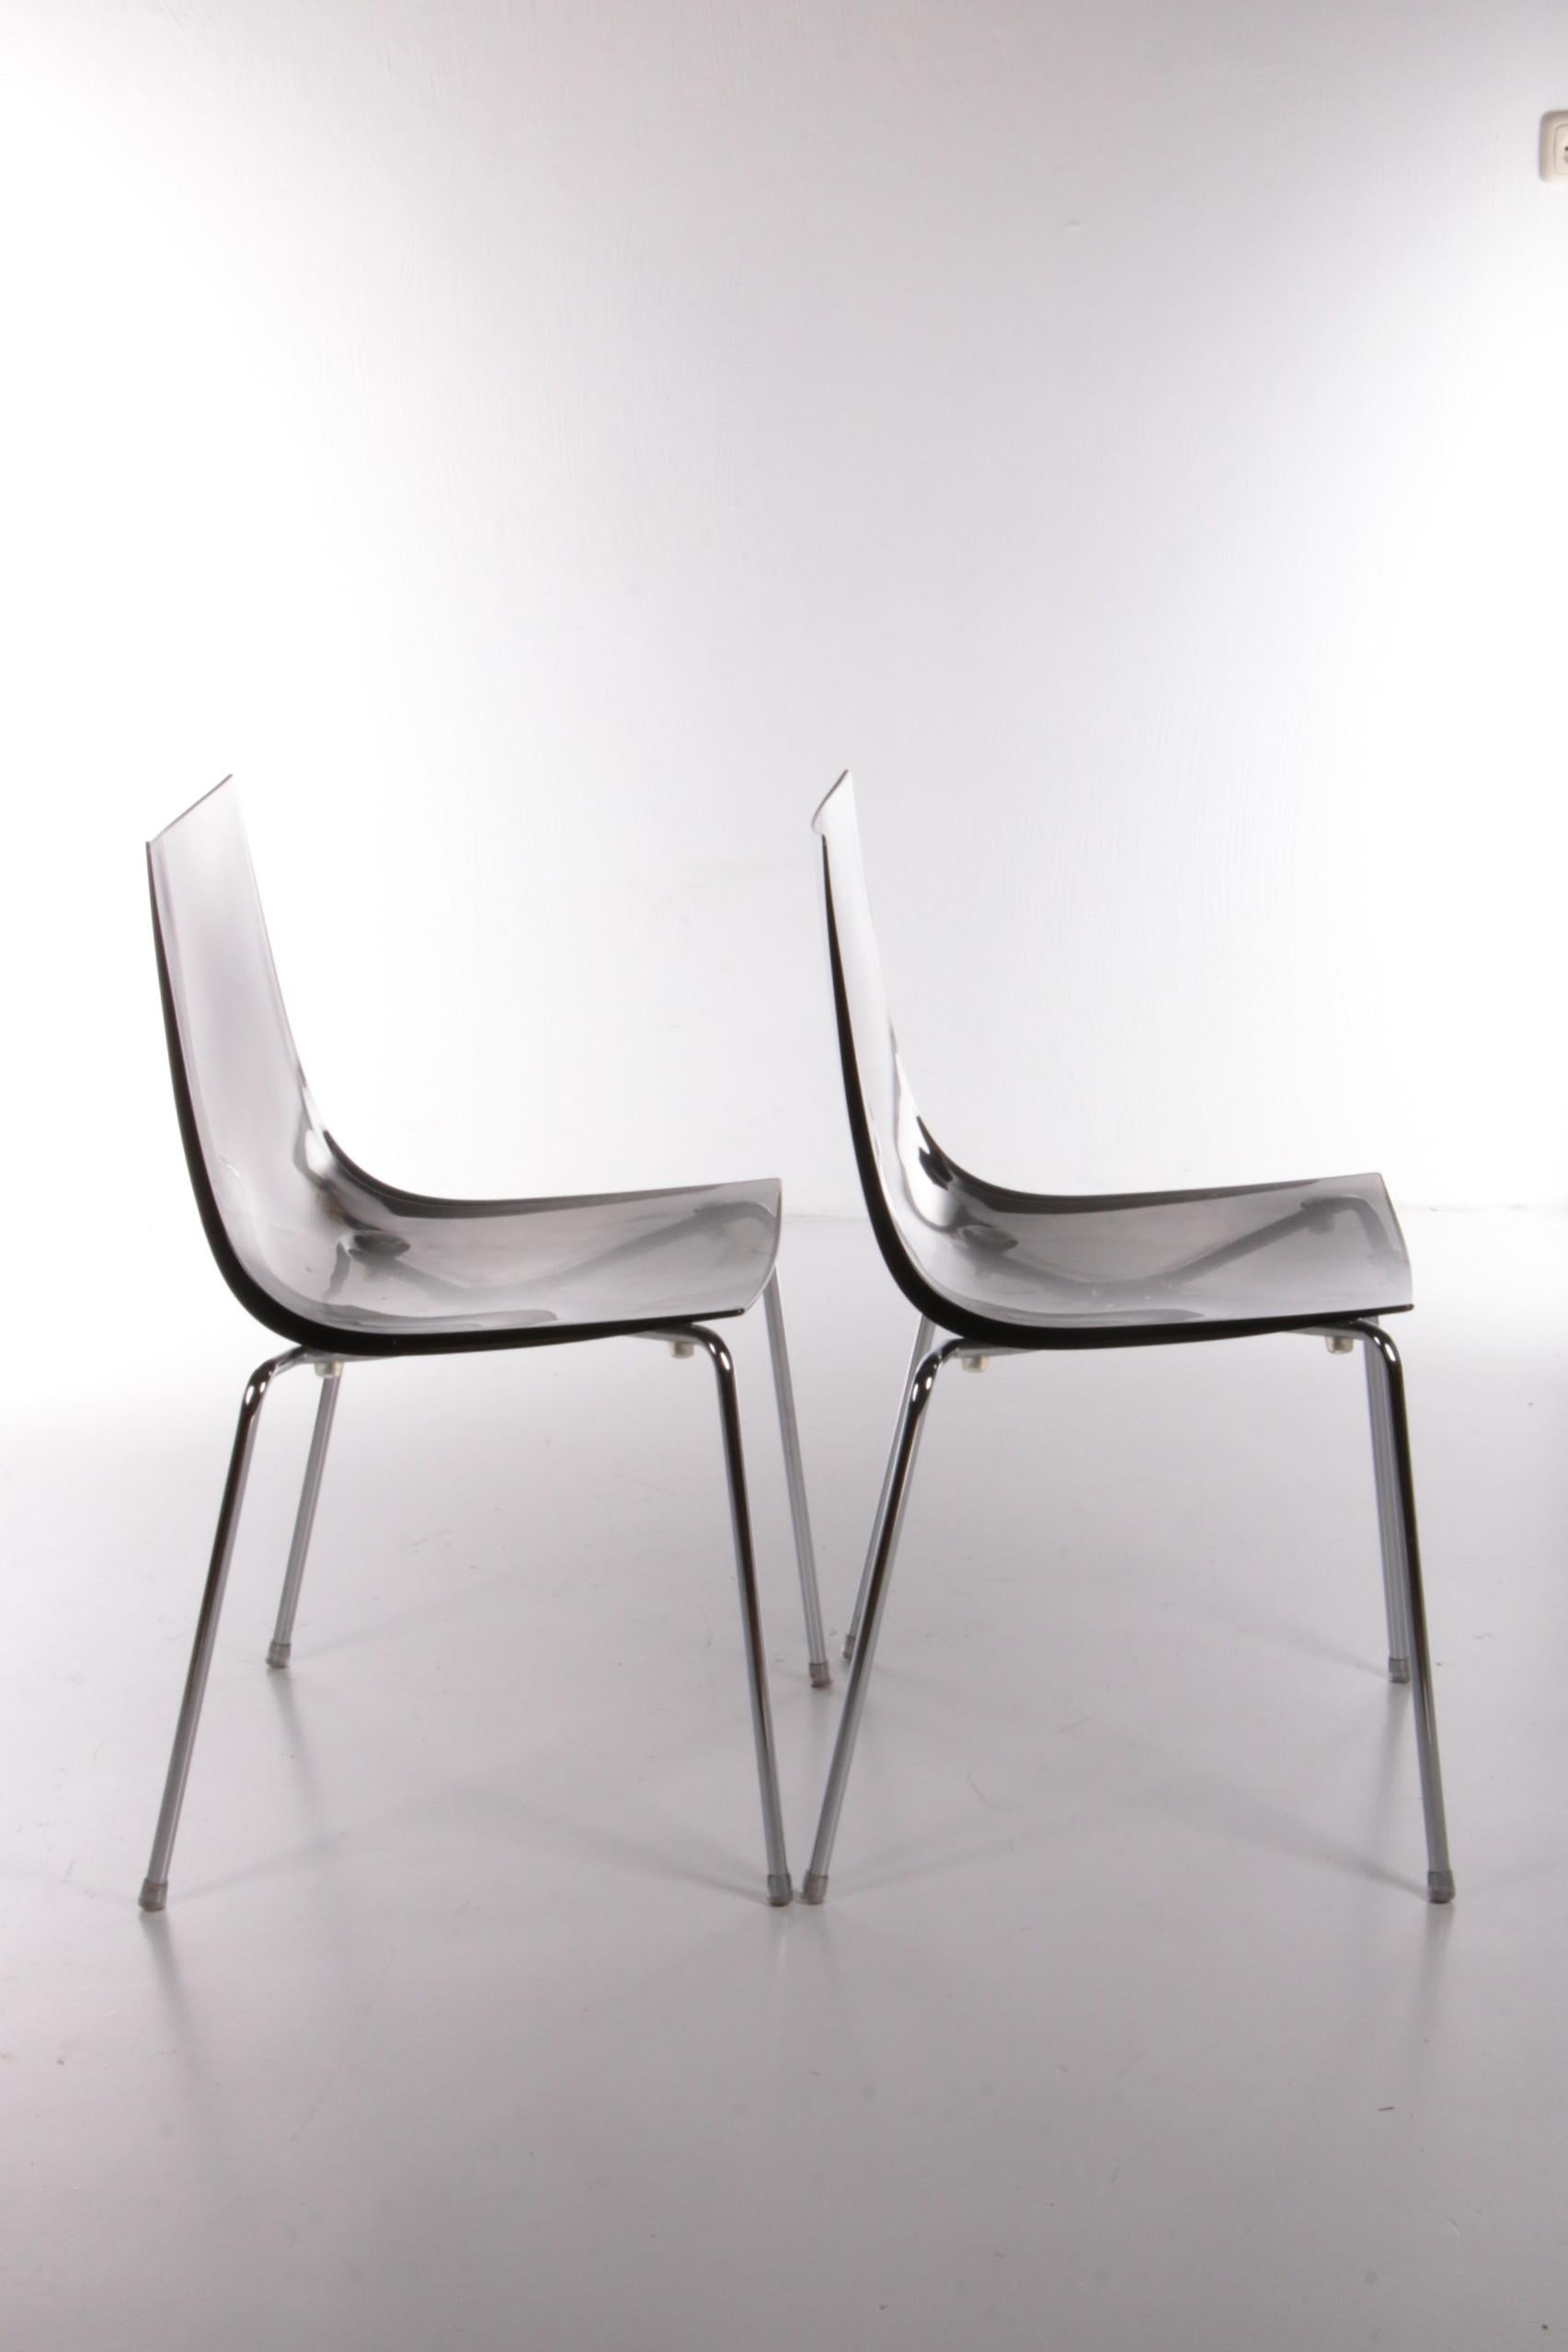 Modern Set of Two Italian Dining Room Chairs by Roberto Foschia, 2007